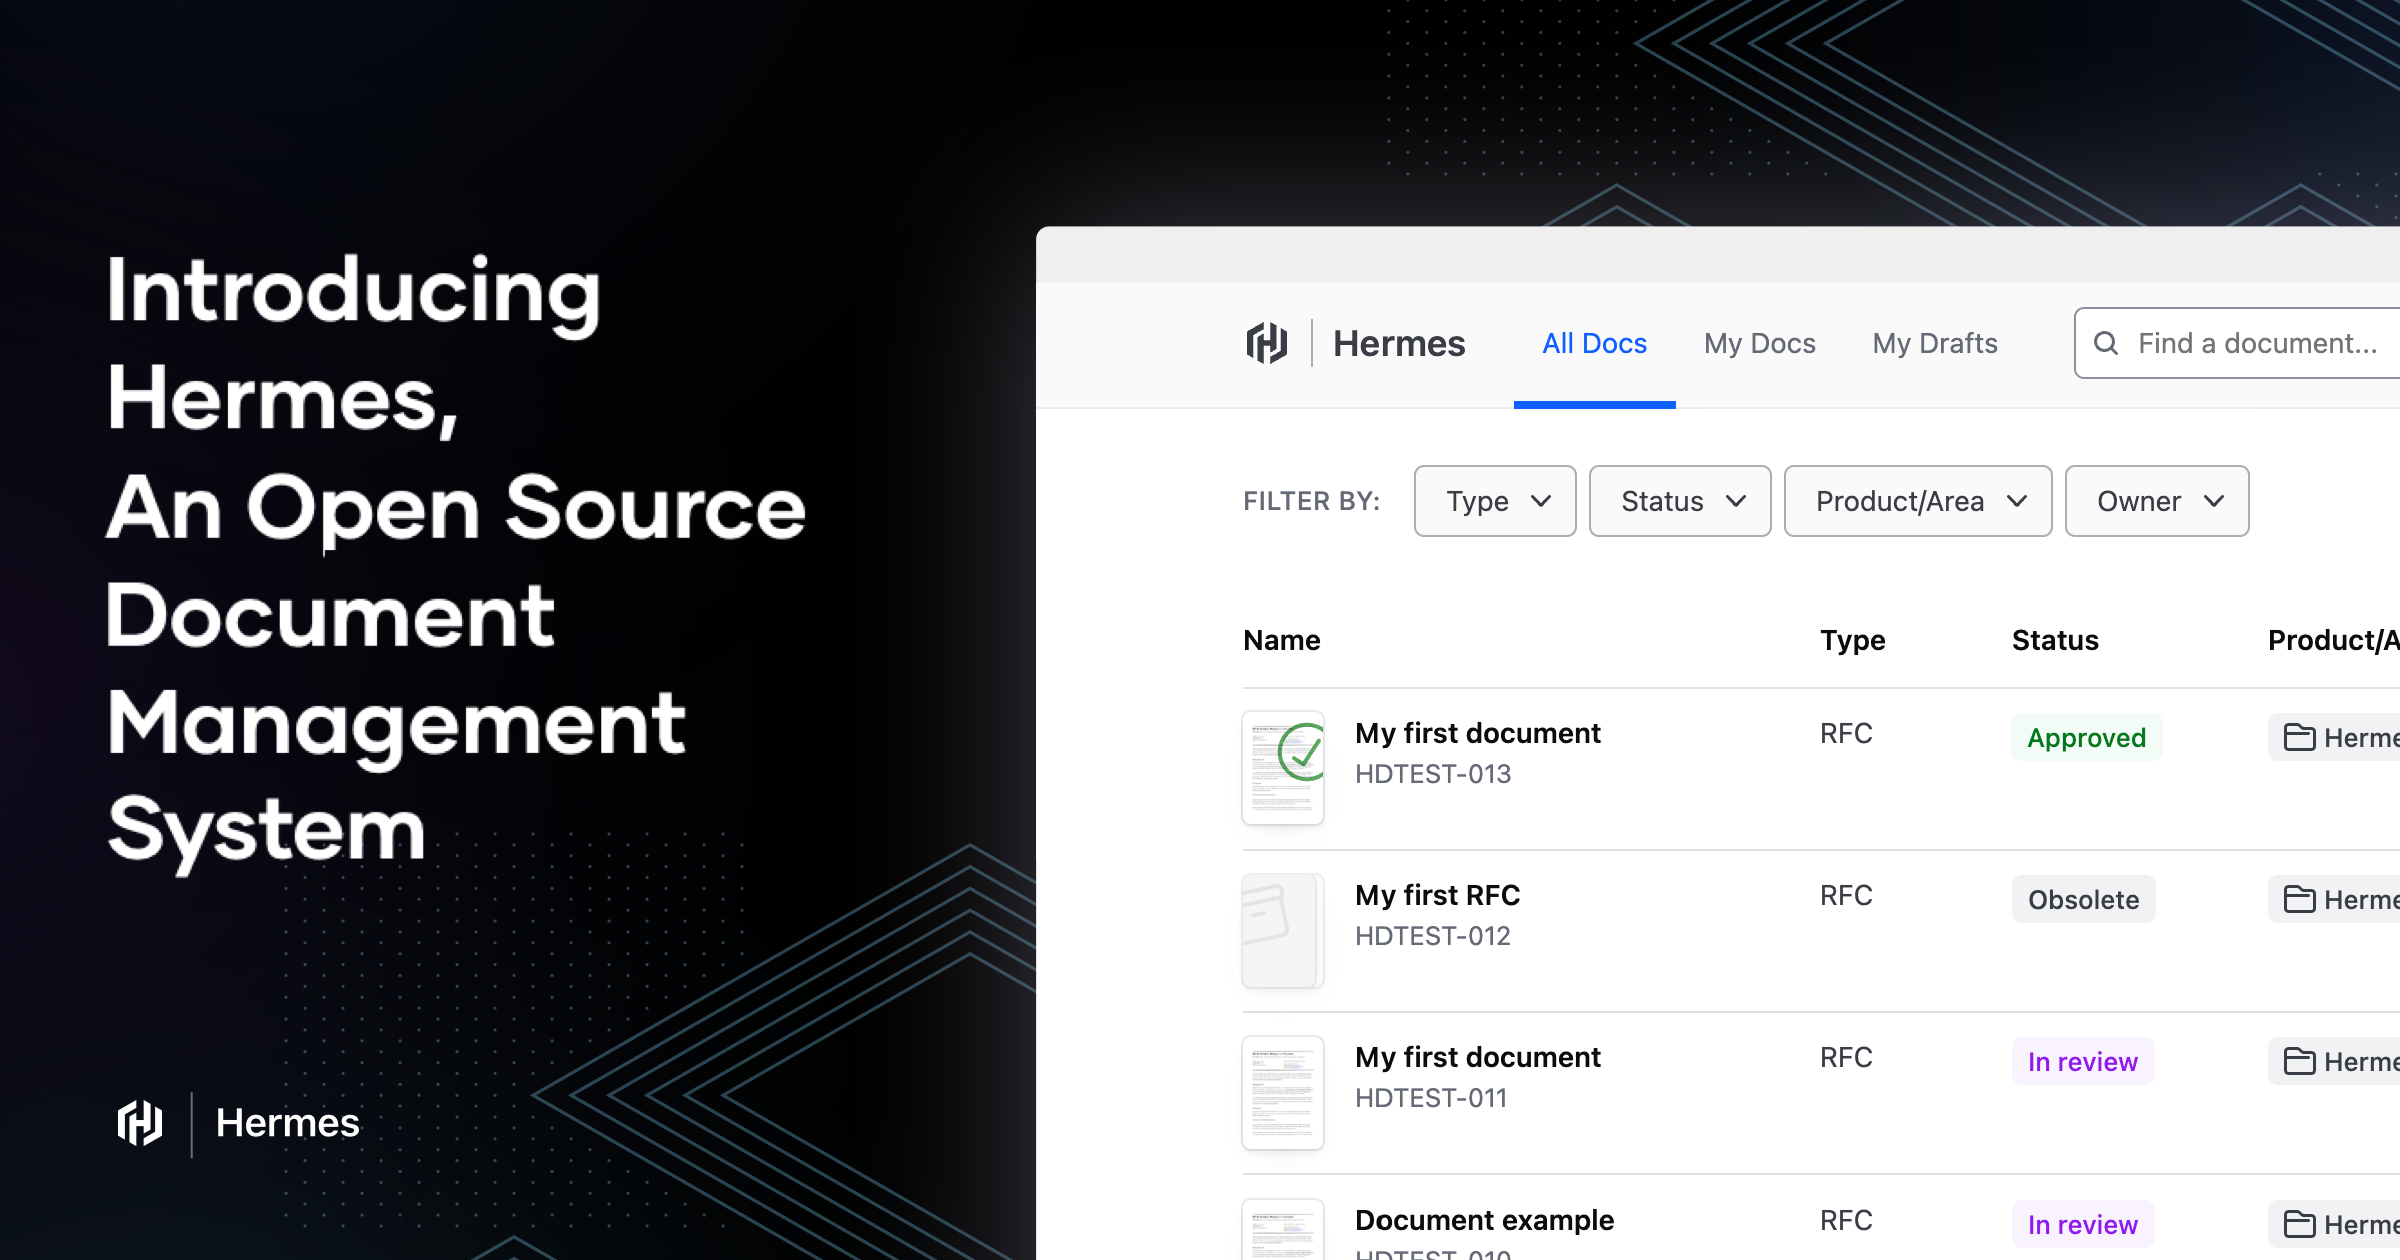 Introducing Hermes, An Open Source Document Management System